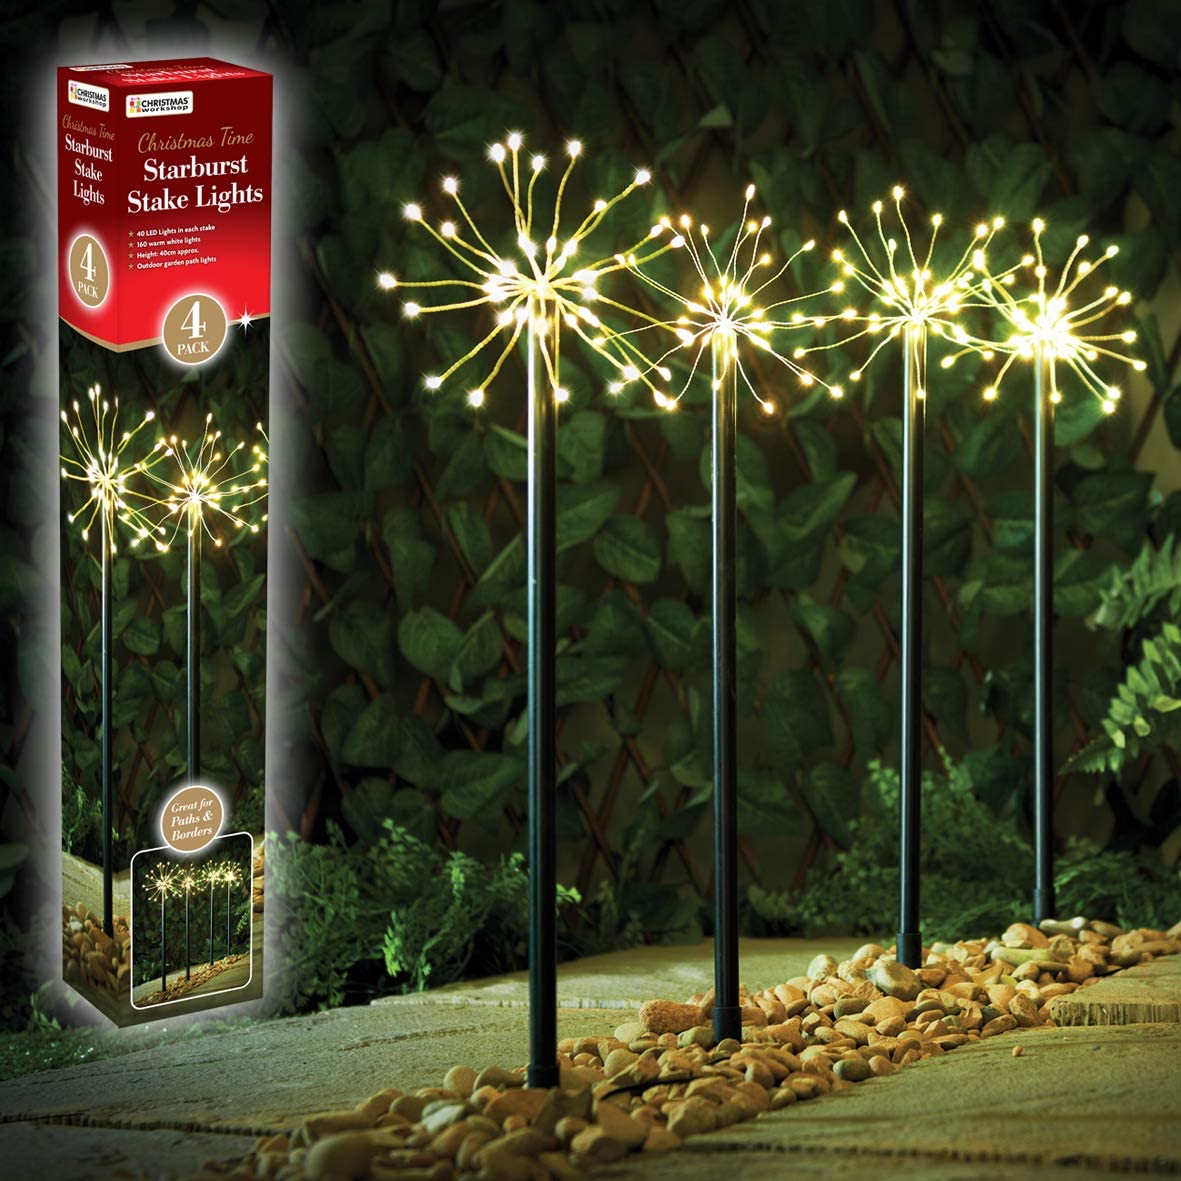 5pcs Christmas Snowflake Pathway Stake Lights 9.5 Ft Total 60 Led Outdoor Snowflake Pathway Markers Battery Operated Fairy Lights for Pathway Walkway Christmas Decoration Cool White